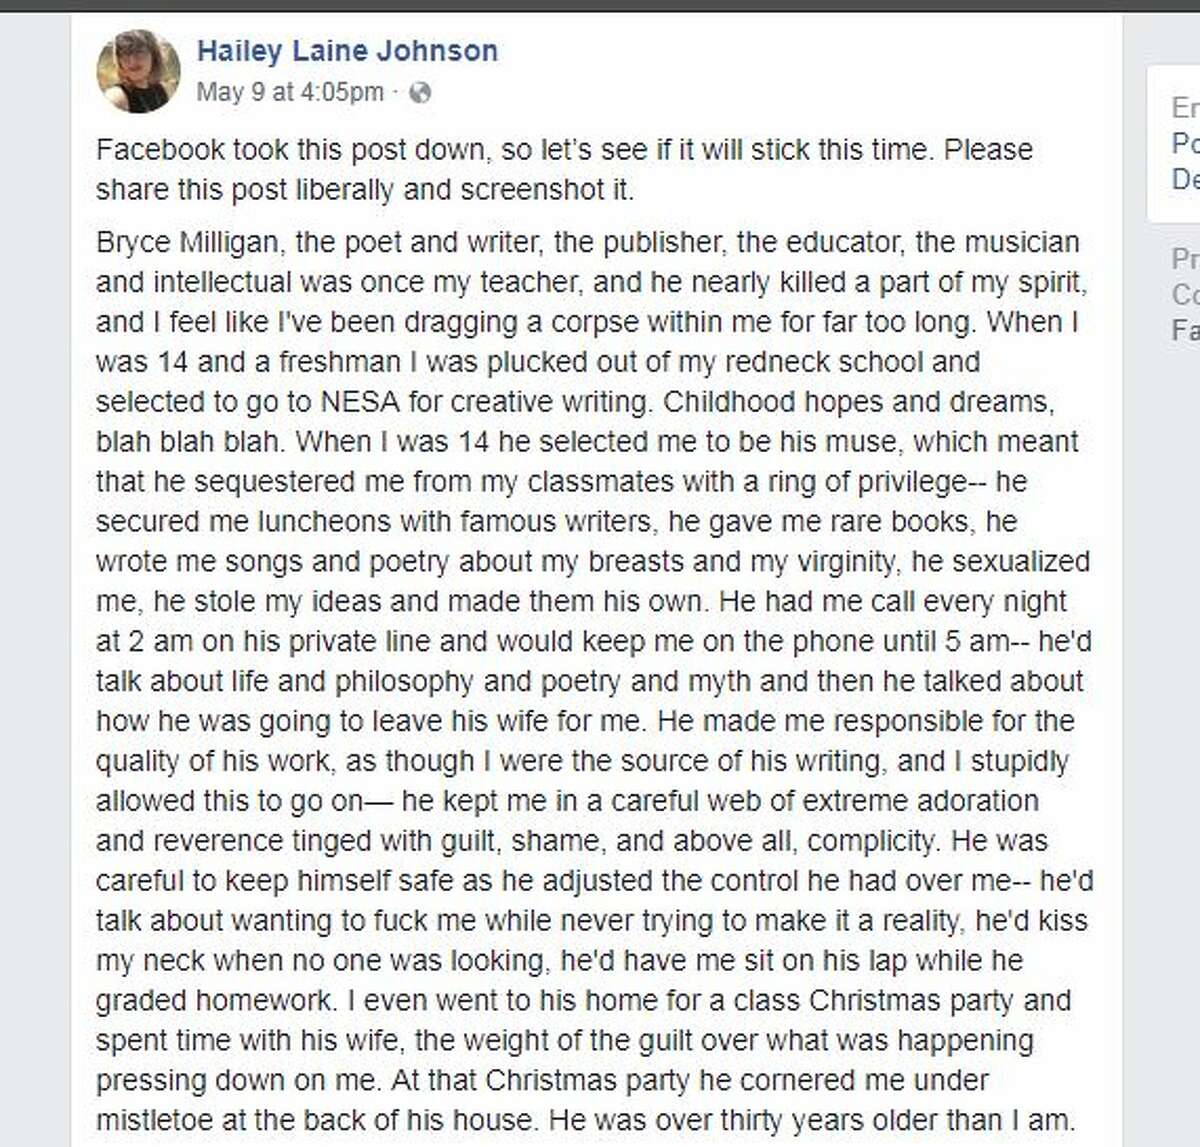 1. Hailey Laine Johnson posted this message to Facebook 4 p.m. May 9, 2018.